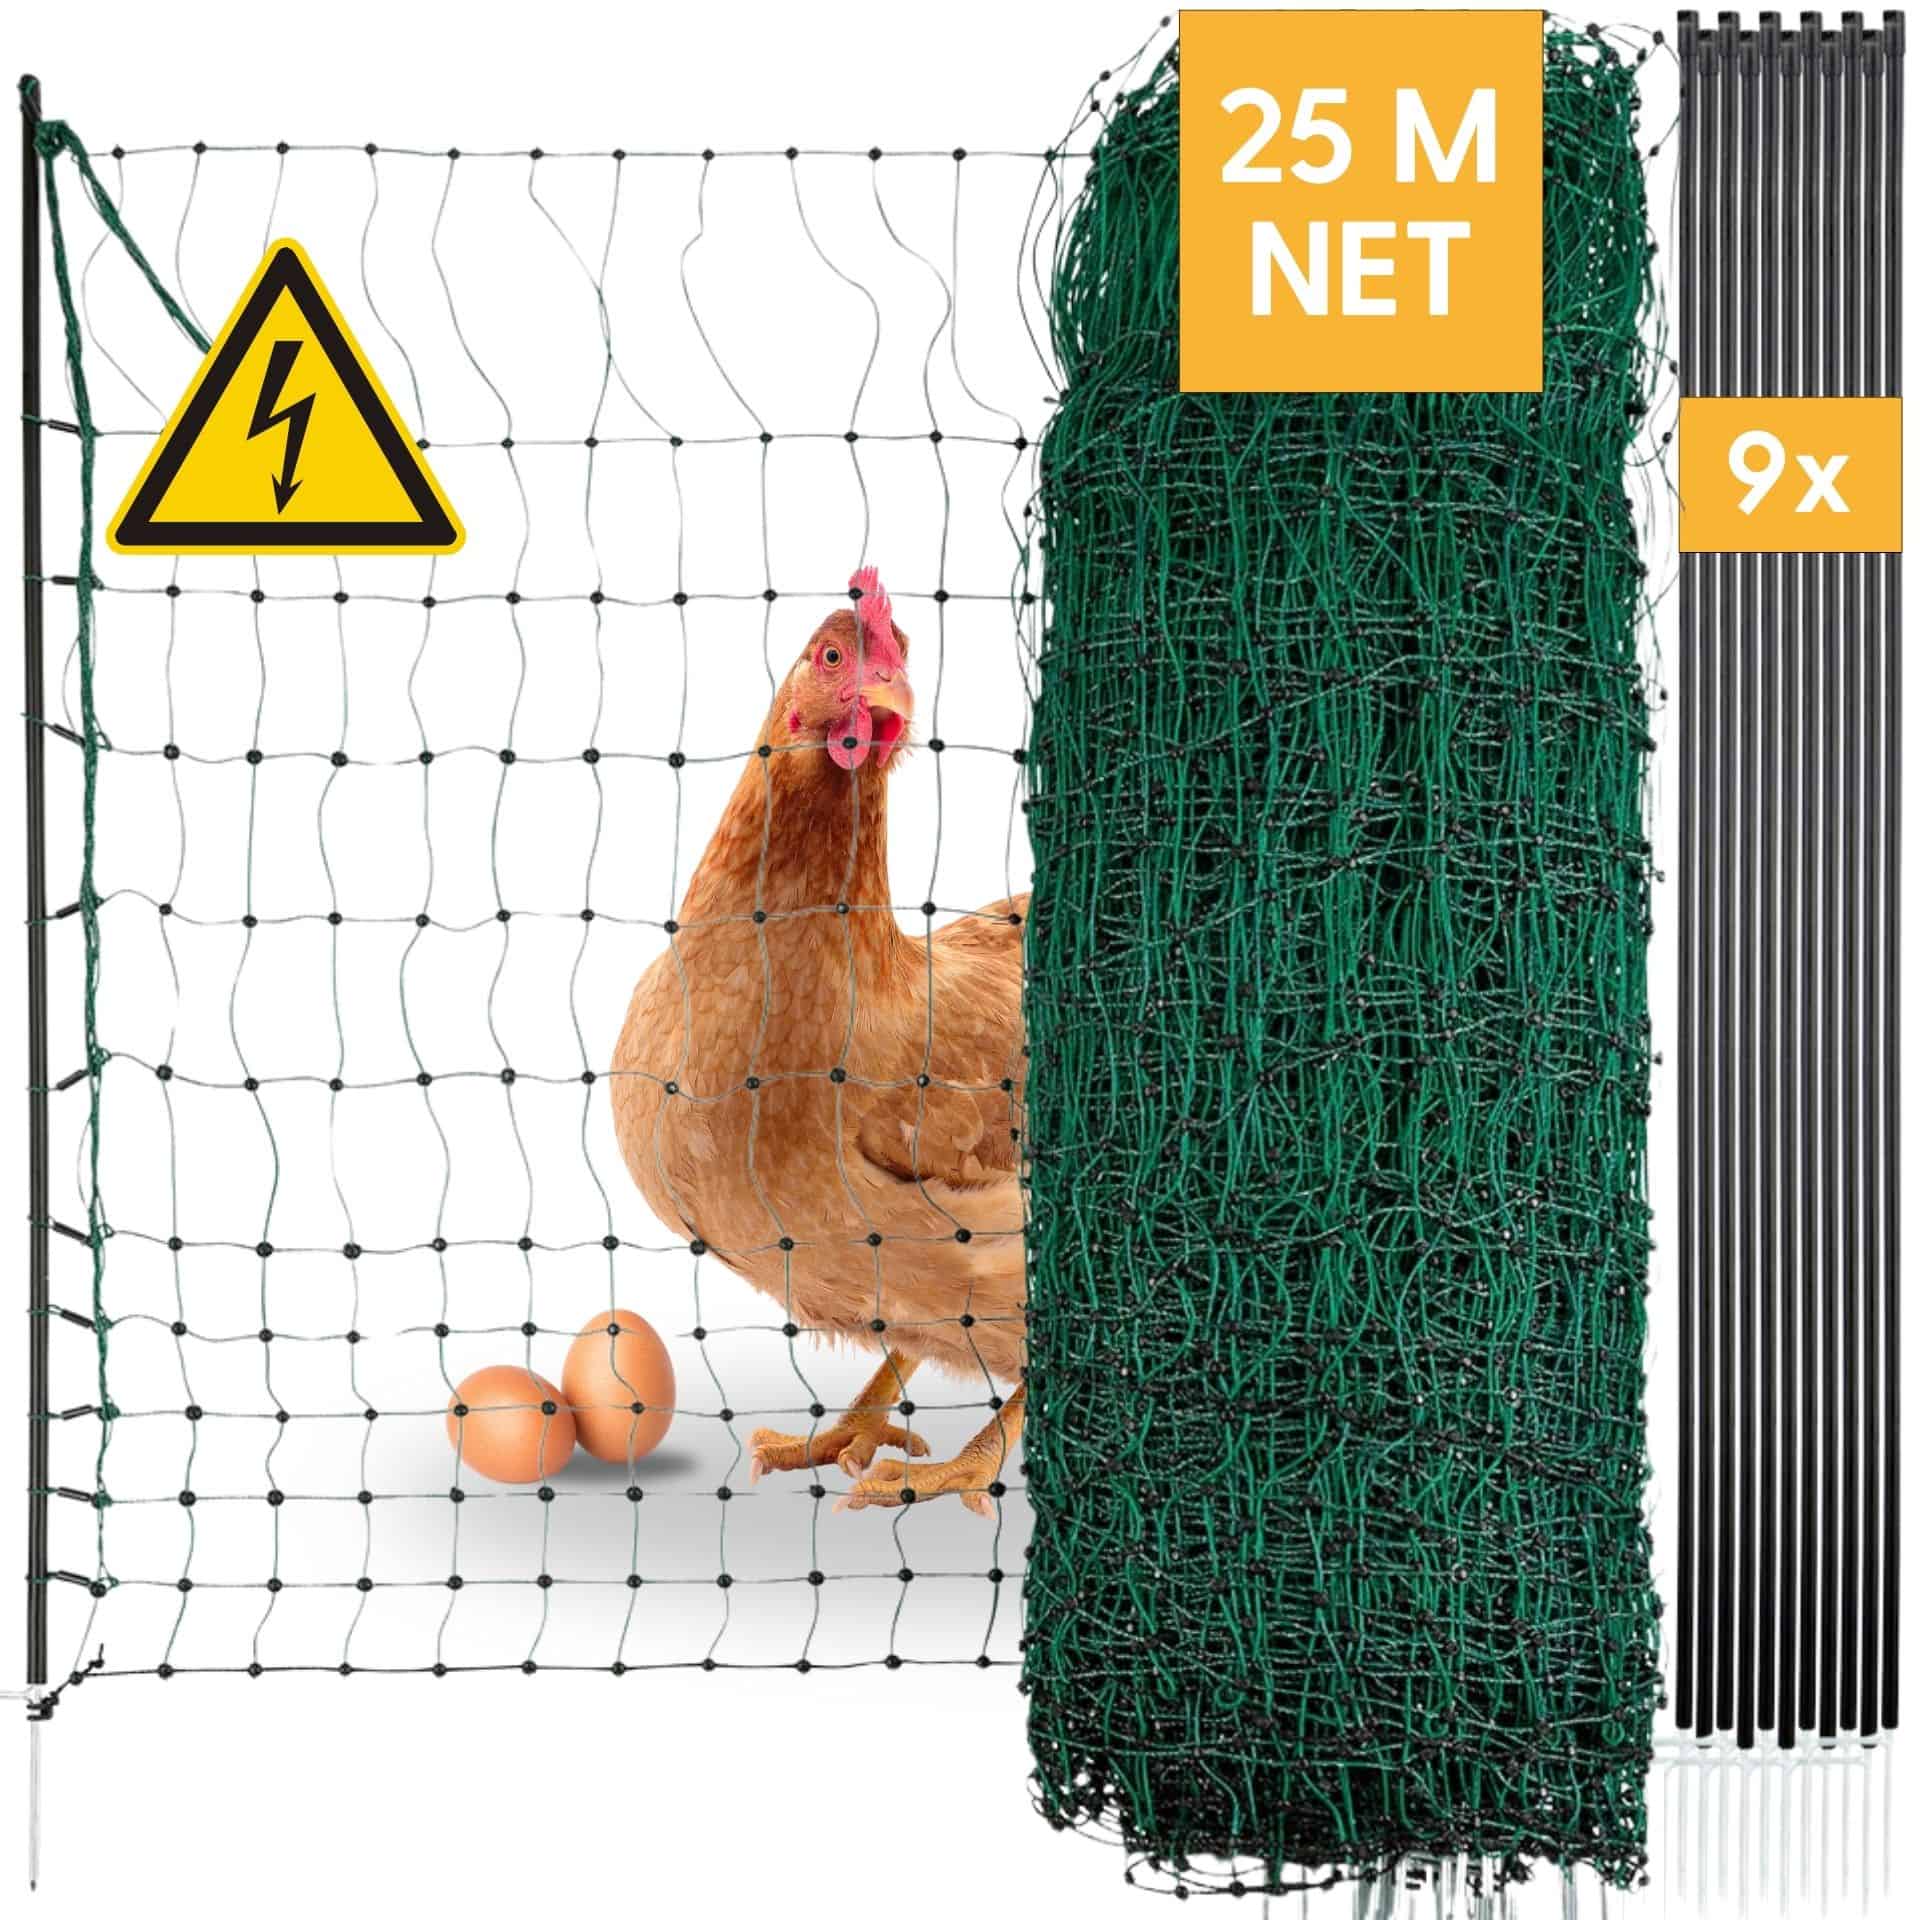 Agrarzone Poultry Net Classic electrificable, double tip, green 25 m x 112 cm